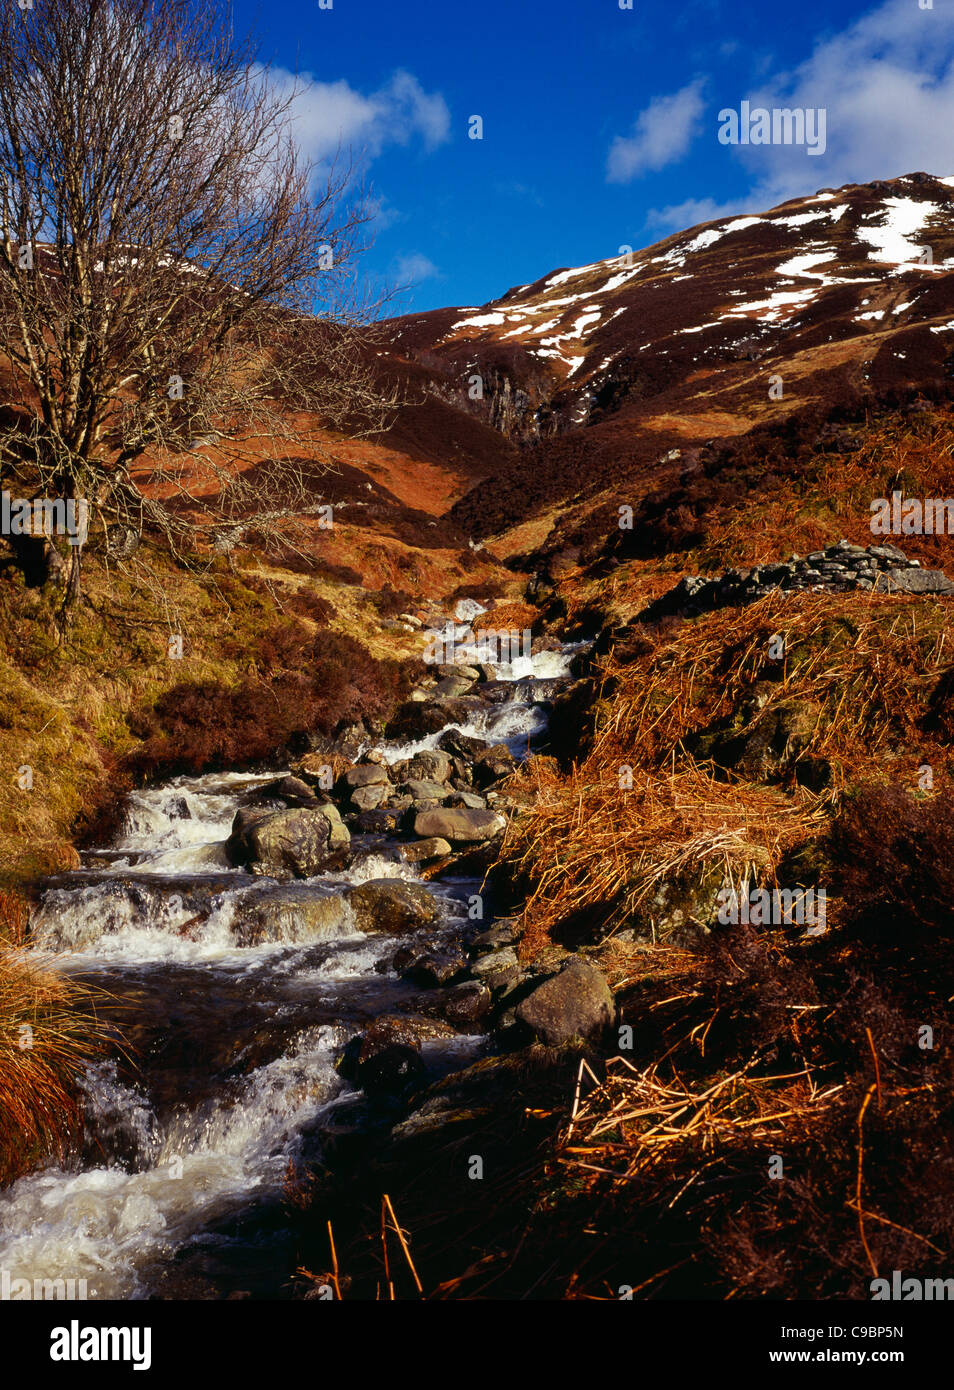 Scotland, Argyll and Bute, Loch Lubnaig, Loch Lomond and Trossachs National Park. Mountain stream flows from west of Benn Each Stock Photo